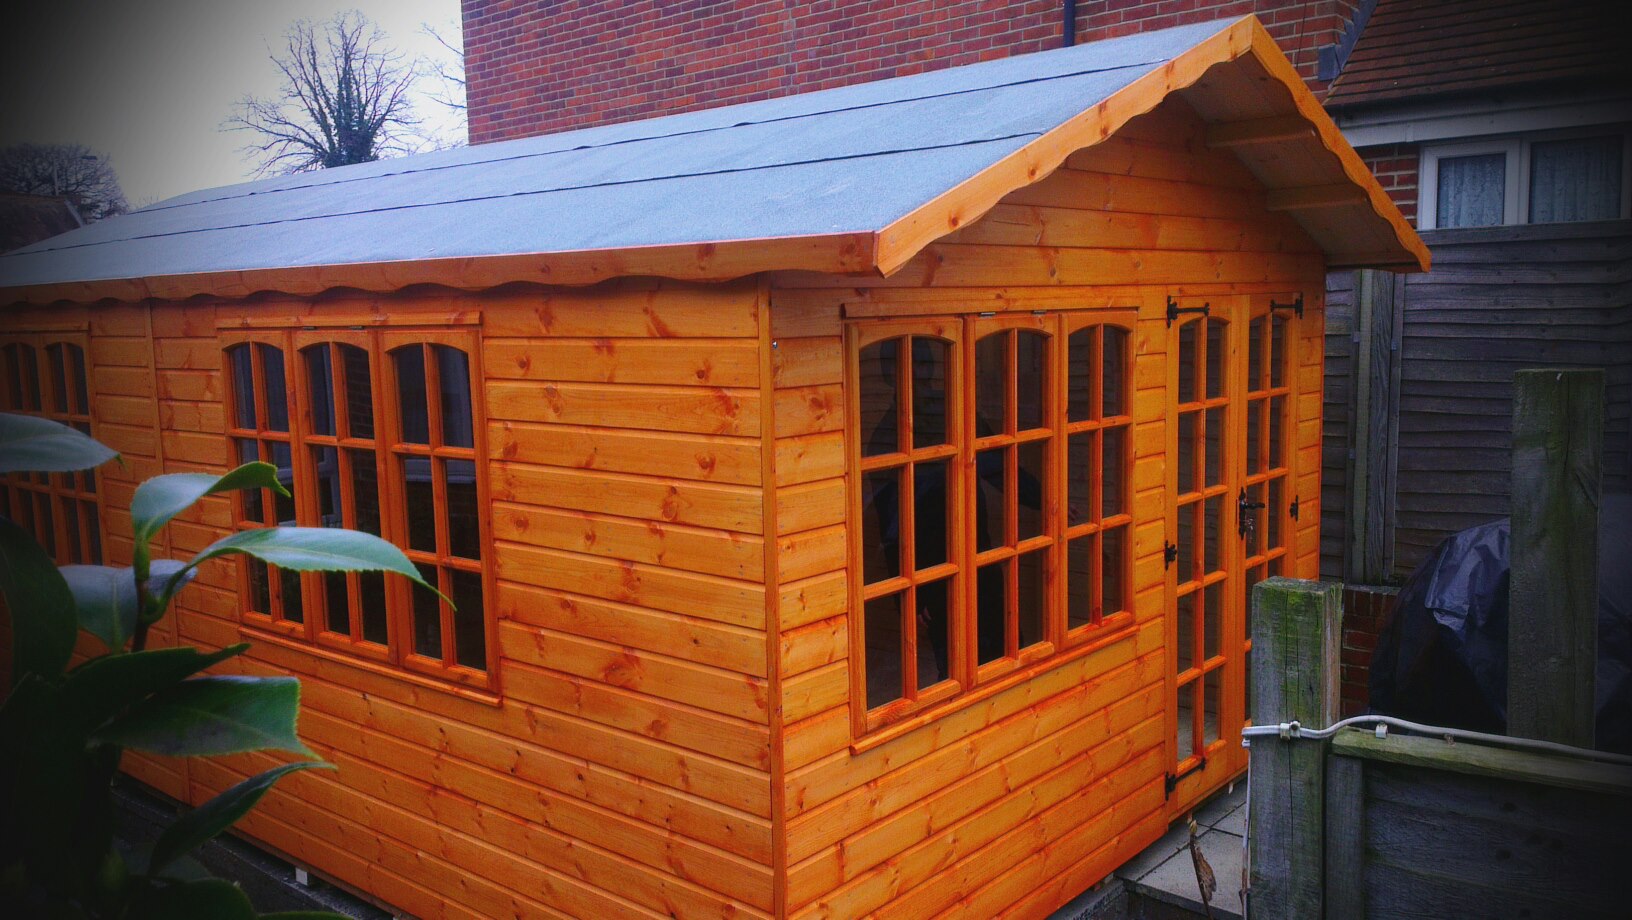 Luxury Sheds &amp; Garden Buildings - New Line Sheds, Reading 